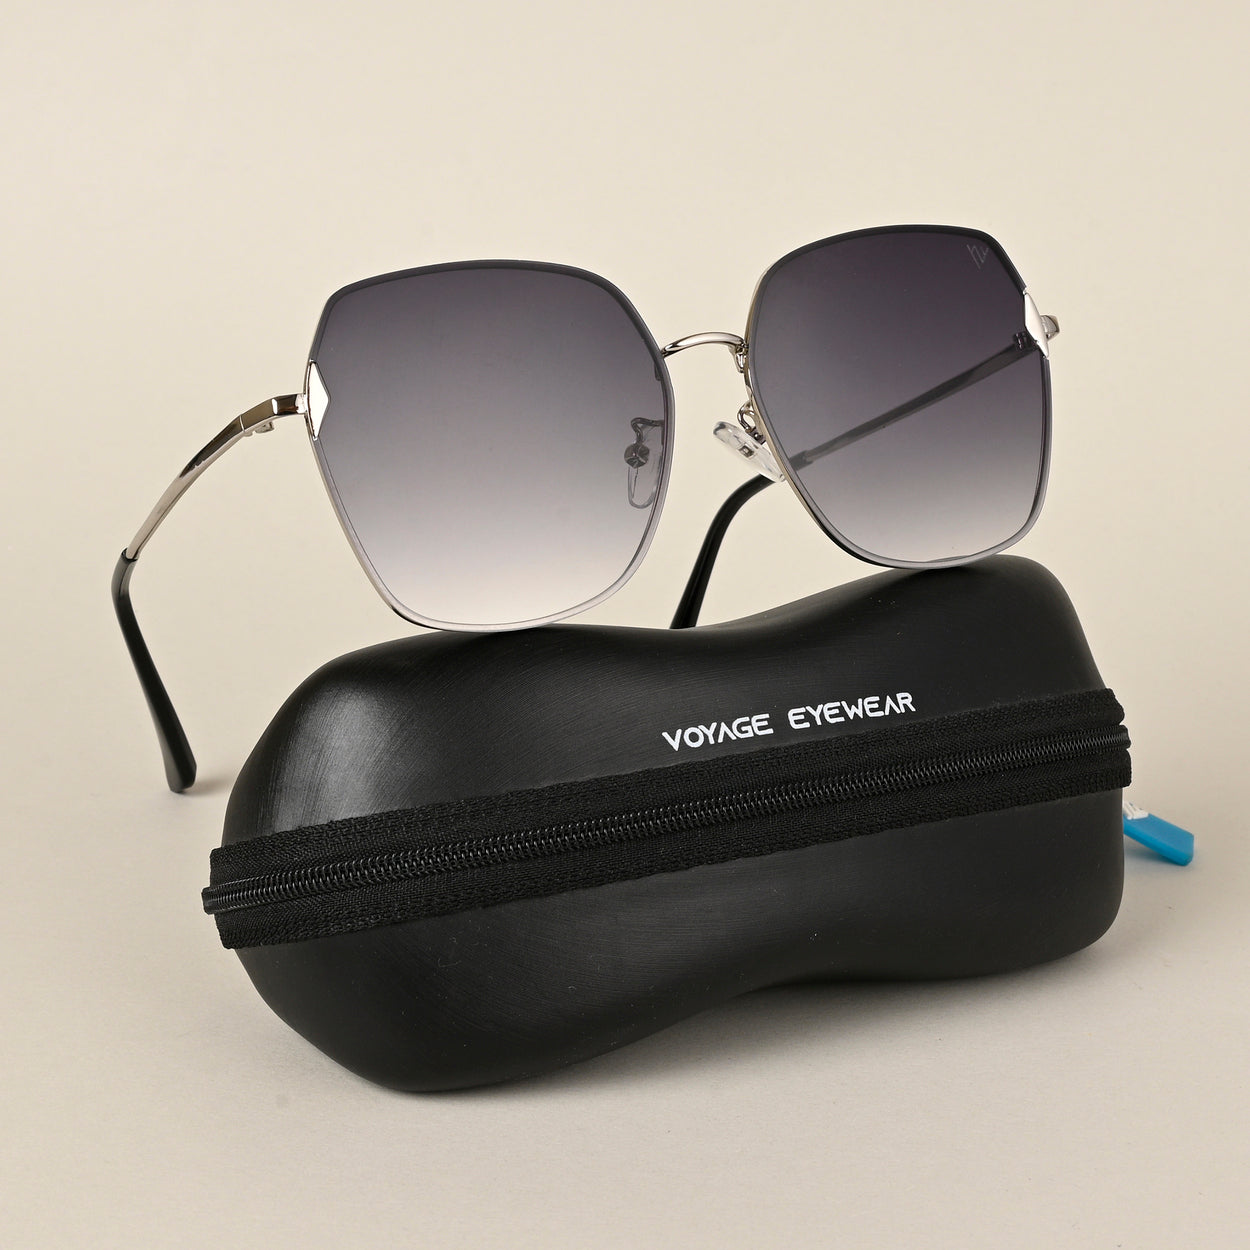 Voyage Grey Oversize Sunglasses for Women - MG4327